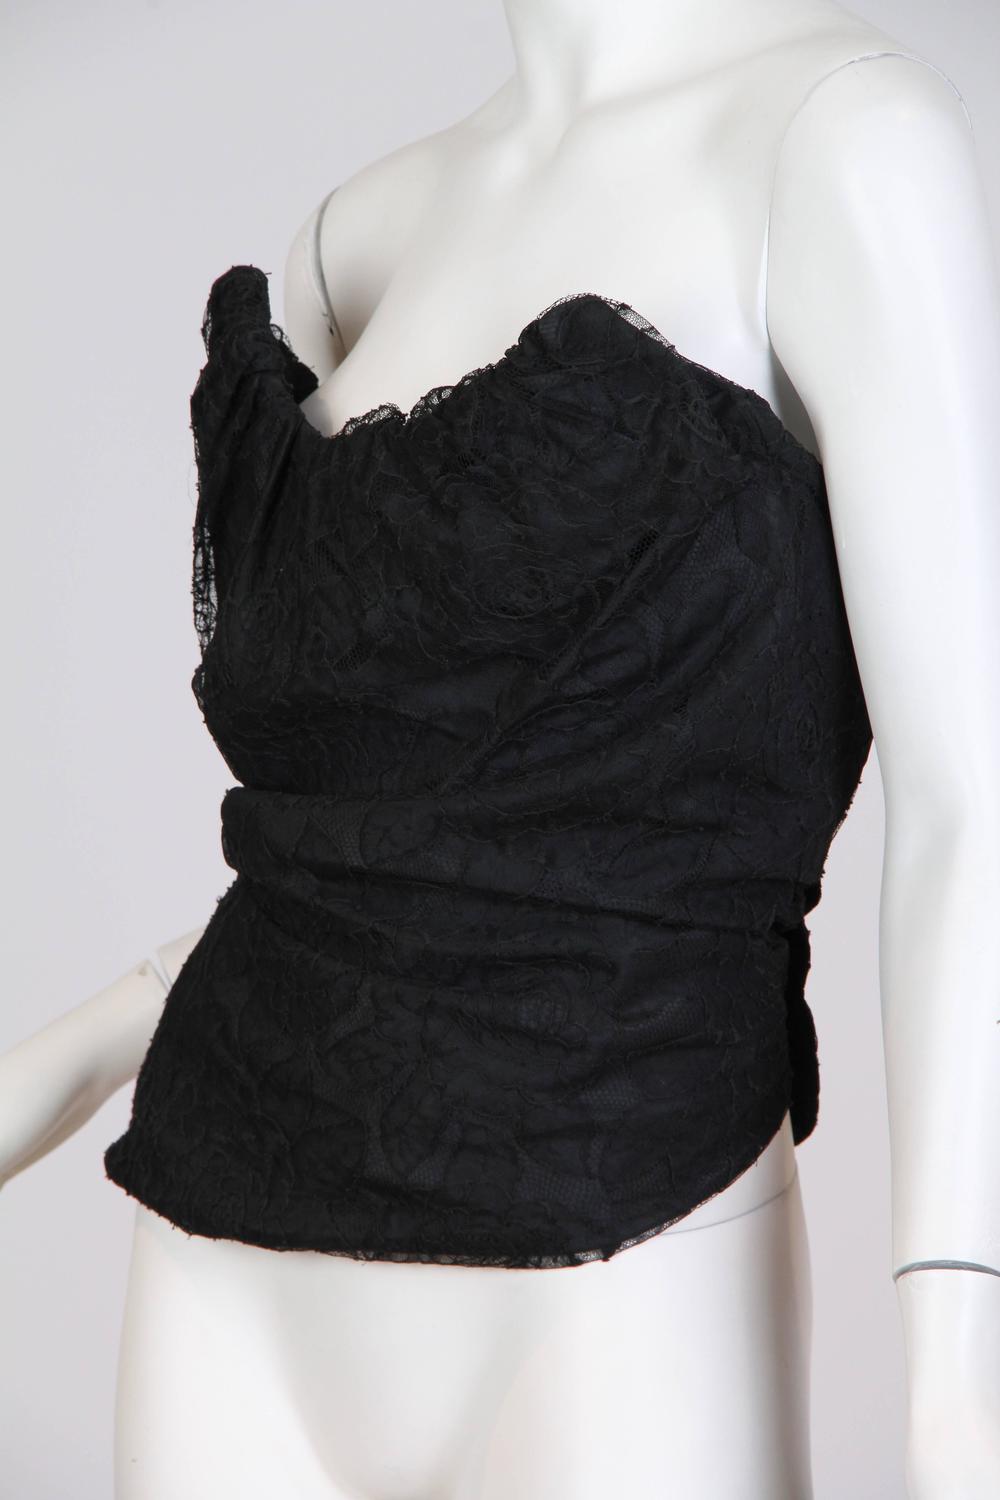 Chantilly Lace Vivienne Westwood Gold Label Corset For Sale at 1stdibs